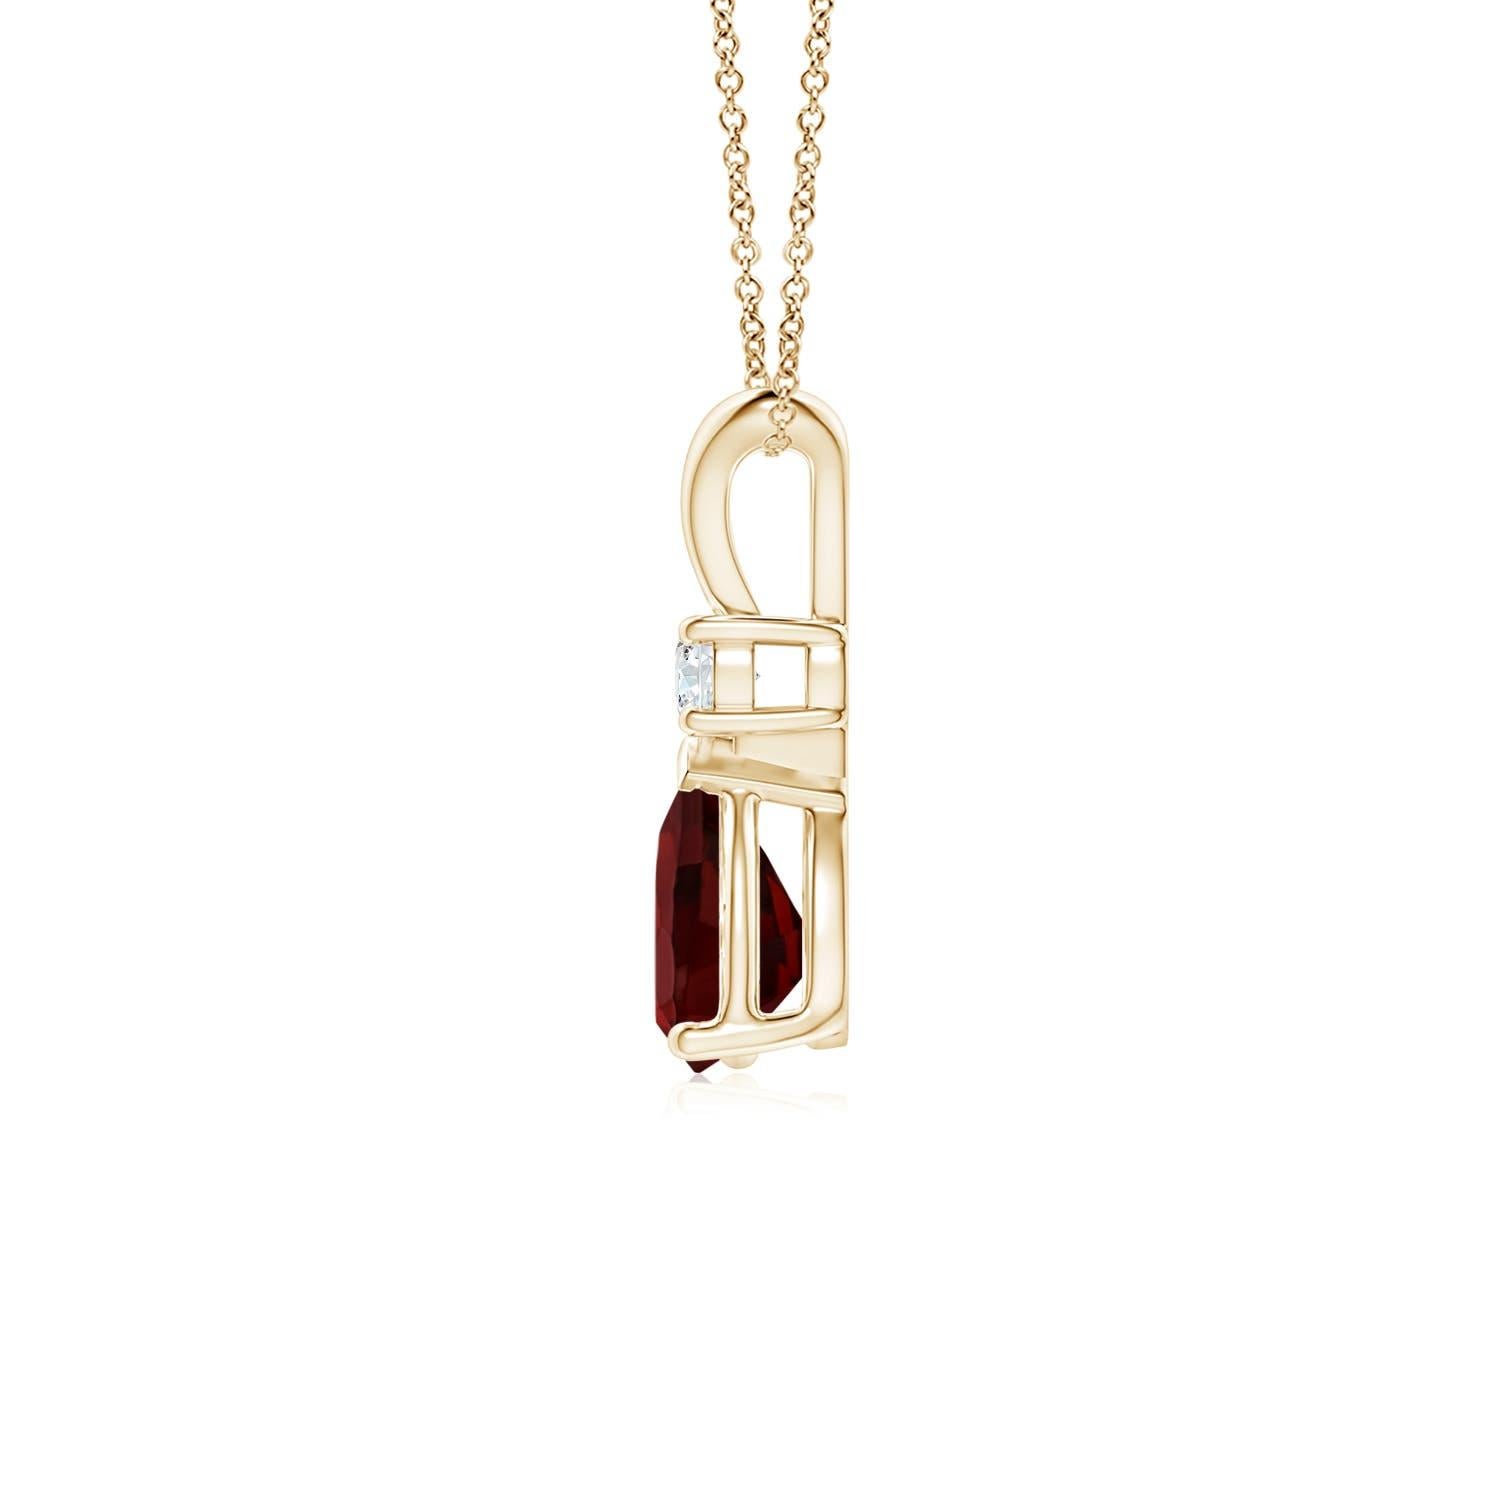 A pear-shaped intense red garnet is secured in a prong setting and embellished with a diamond accent on the top. Simple yet stunning, this teardrop garnet pendant with V bale is sculpted in 14k yellow gold.
Garnet is the Birthstone for January and